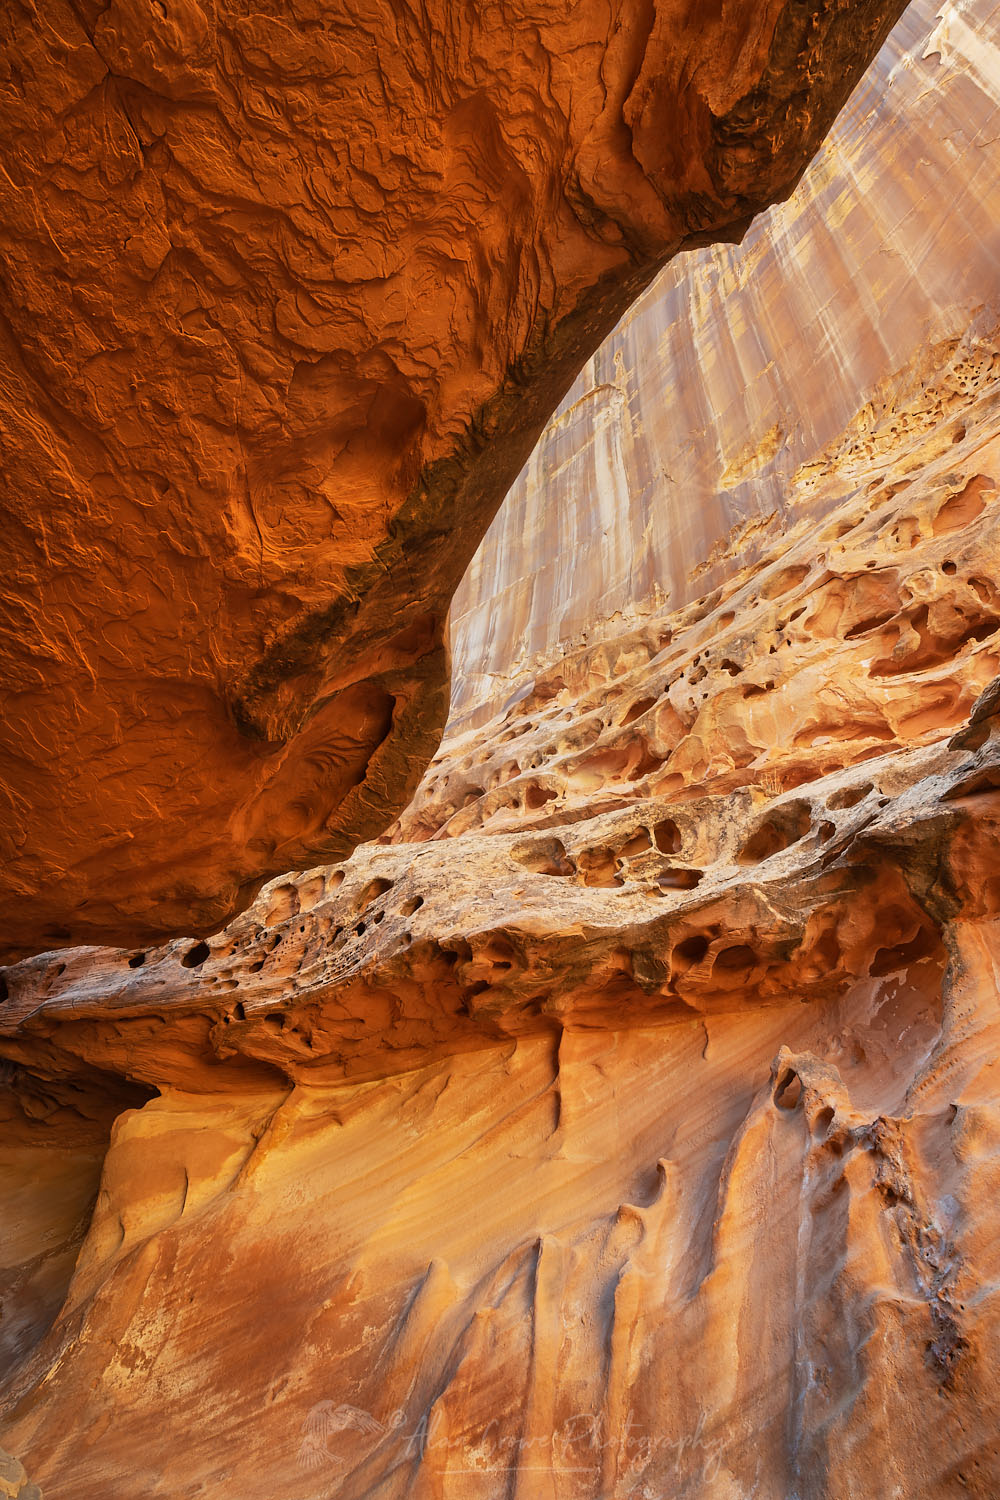 Eroded sandstone walls and overhangs in the"subway" slot portion of Crack Canyon San Rafael Reef Utah #75128